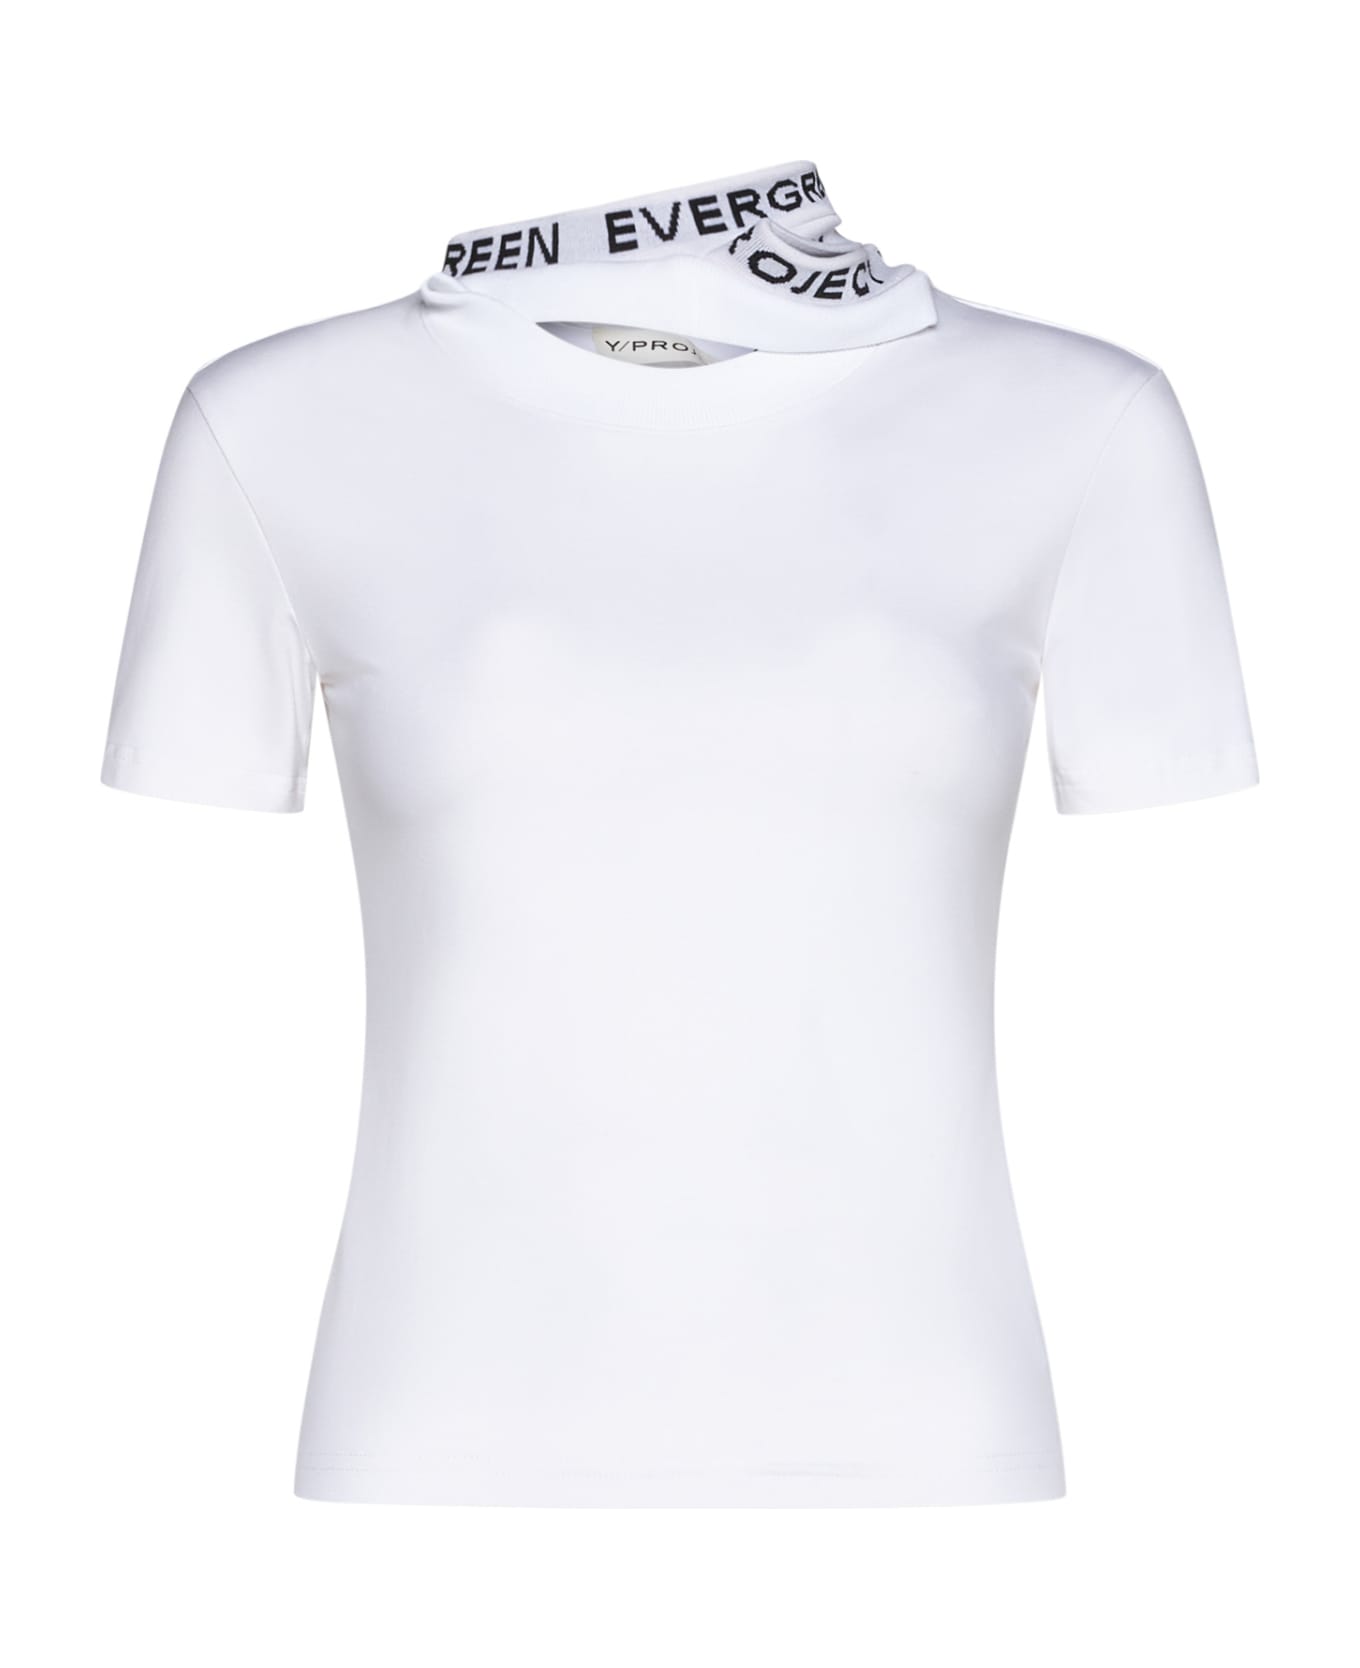 Y/Project T-Shirt - Evergreen white